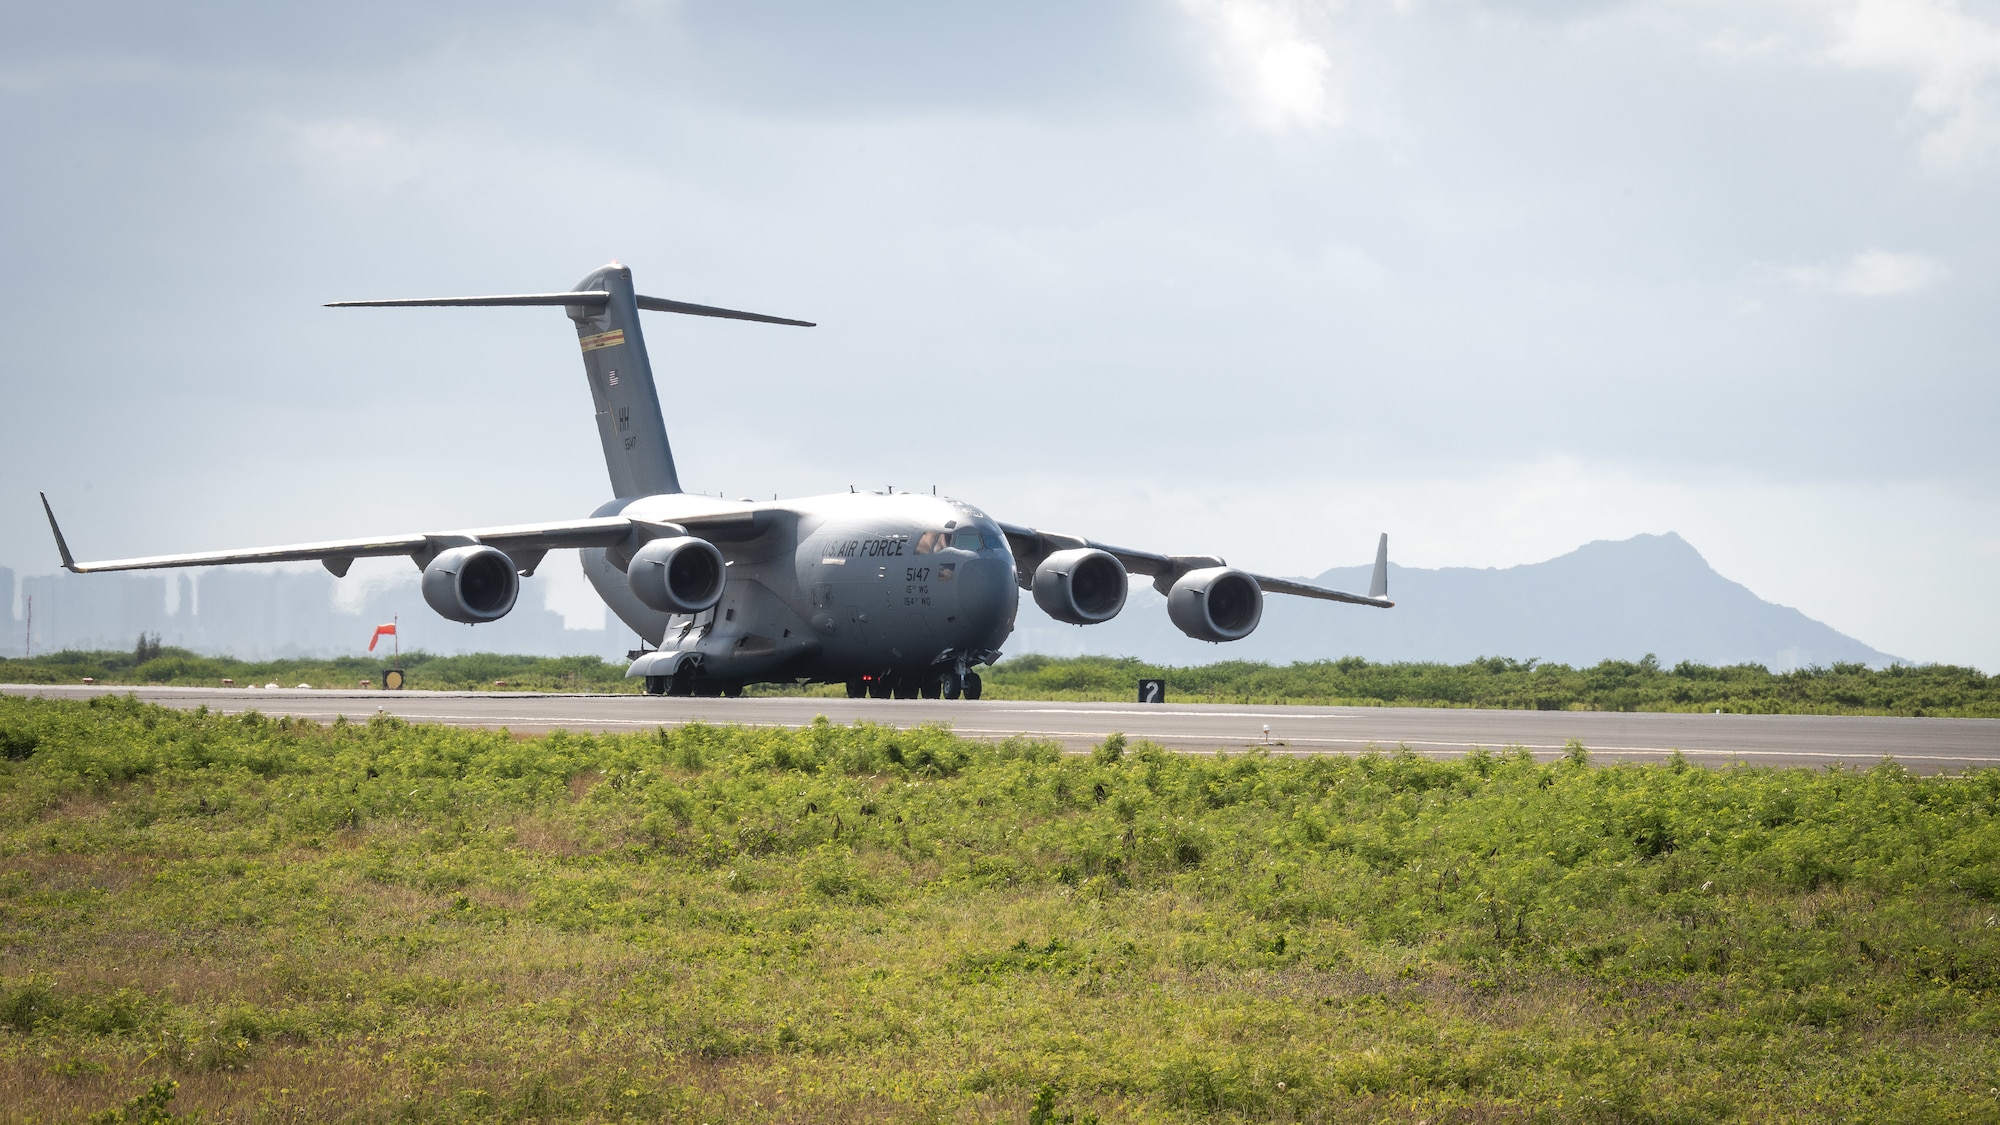 A U.S. Air Force C-17 Globemaster III taxis on the runway during a routine training schedule April 21, 2020, at Honolulu International Airport, Hawaii. Given the low traffic at the airport due to COVID-19 mitigation efforts, the active-duty 15th Wing and the Hawaii Air National Guard’s 154th Wing seized an opportunity to document the operation which showcases readiness and their unique Total Force Integration construct. The units of Team Hickam work together seamlessly to deliver combat airpower, tanker fuel, and humanitarian support and disaster relief across the Indo-Pacific. (U.S. Air National Guard photo by Senior Airman John Linzmeier)